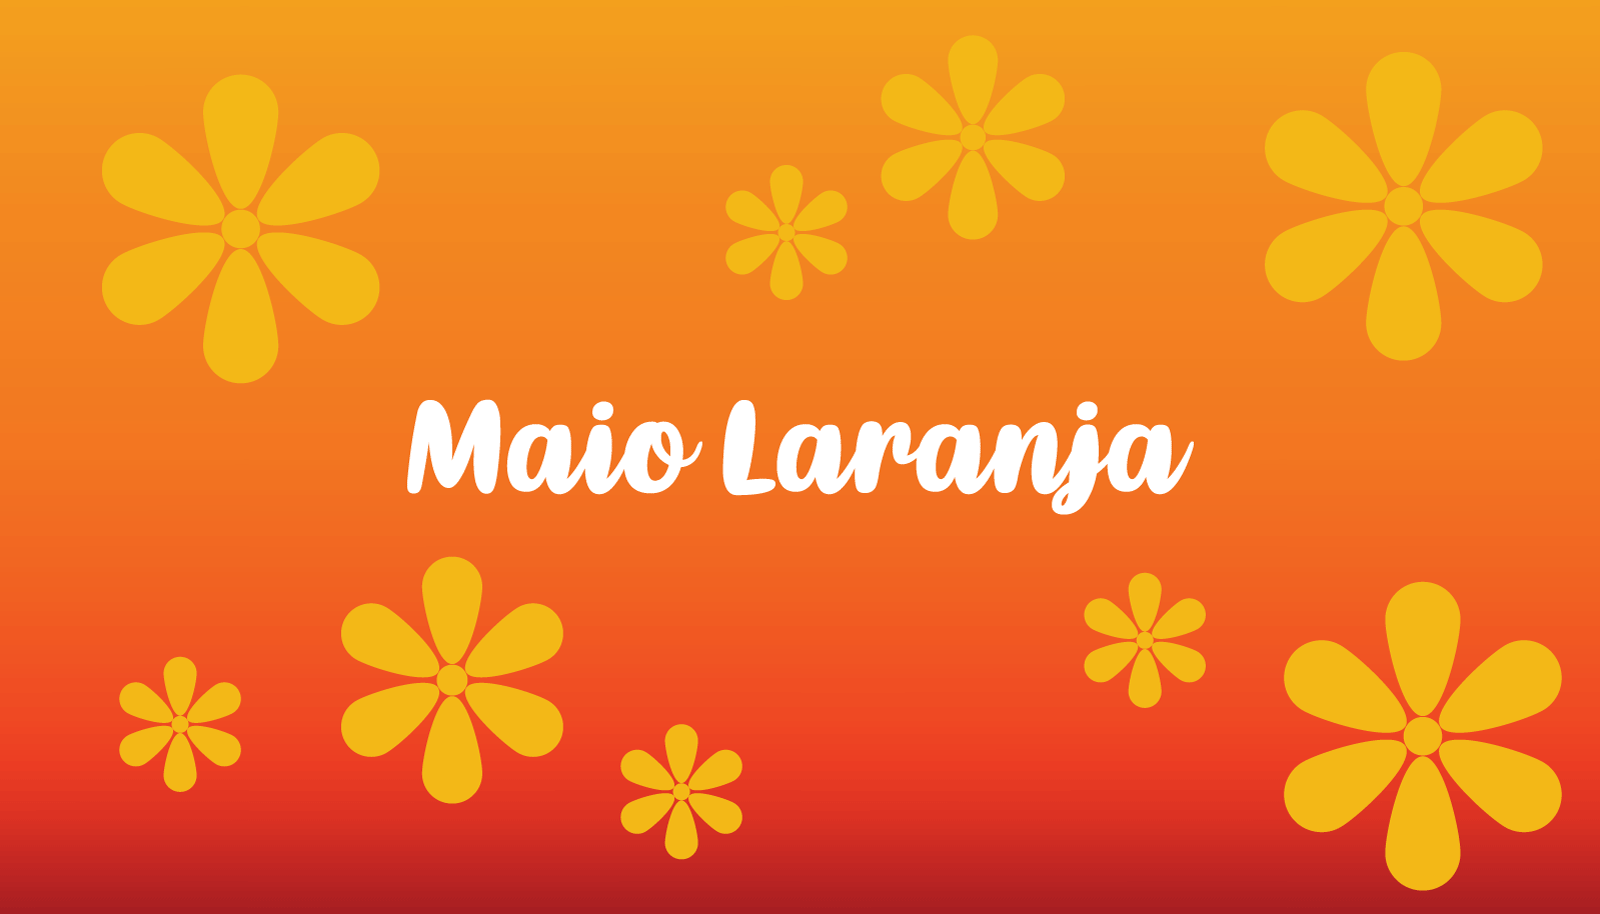 Maio laranja campaign against violence research of children 18 may Logo Template